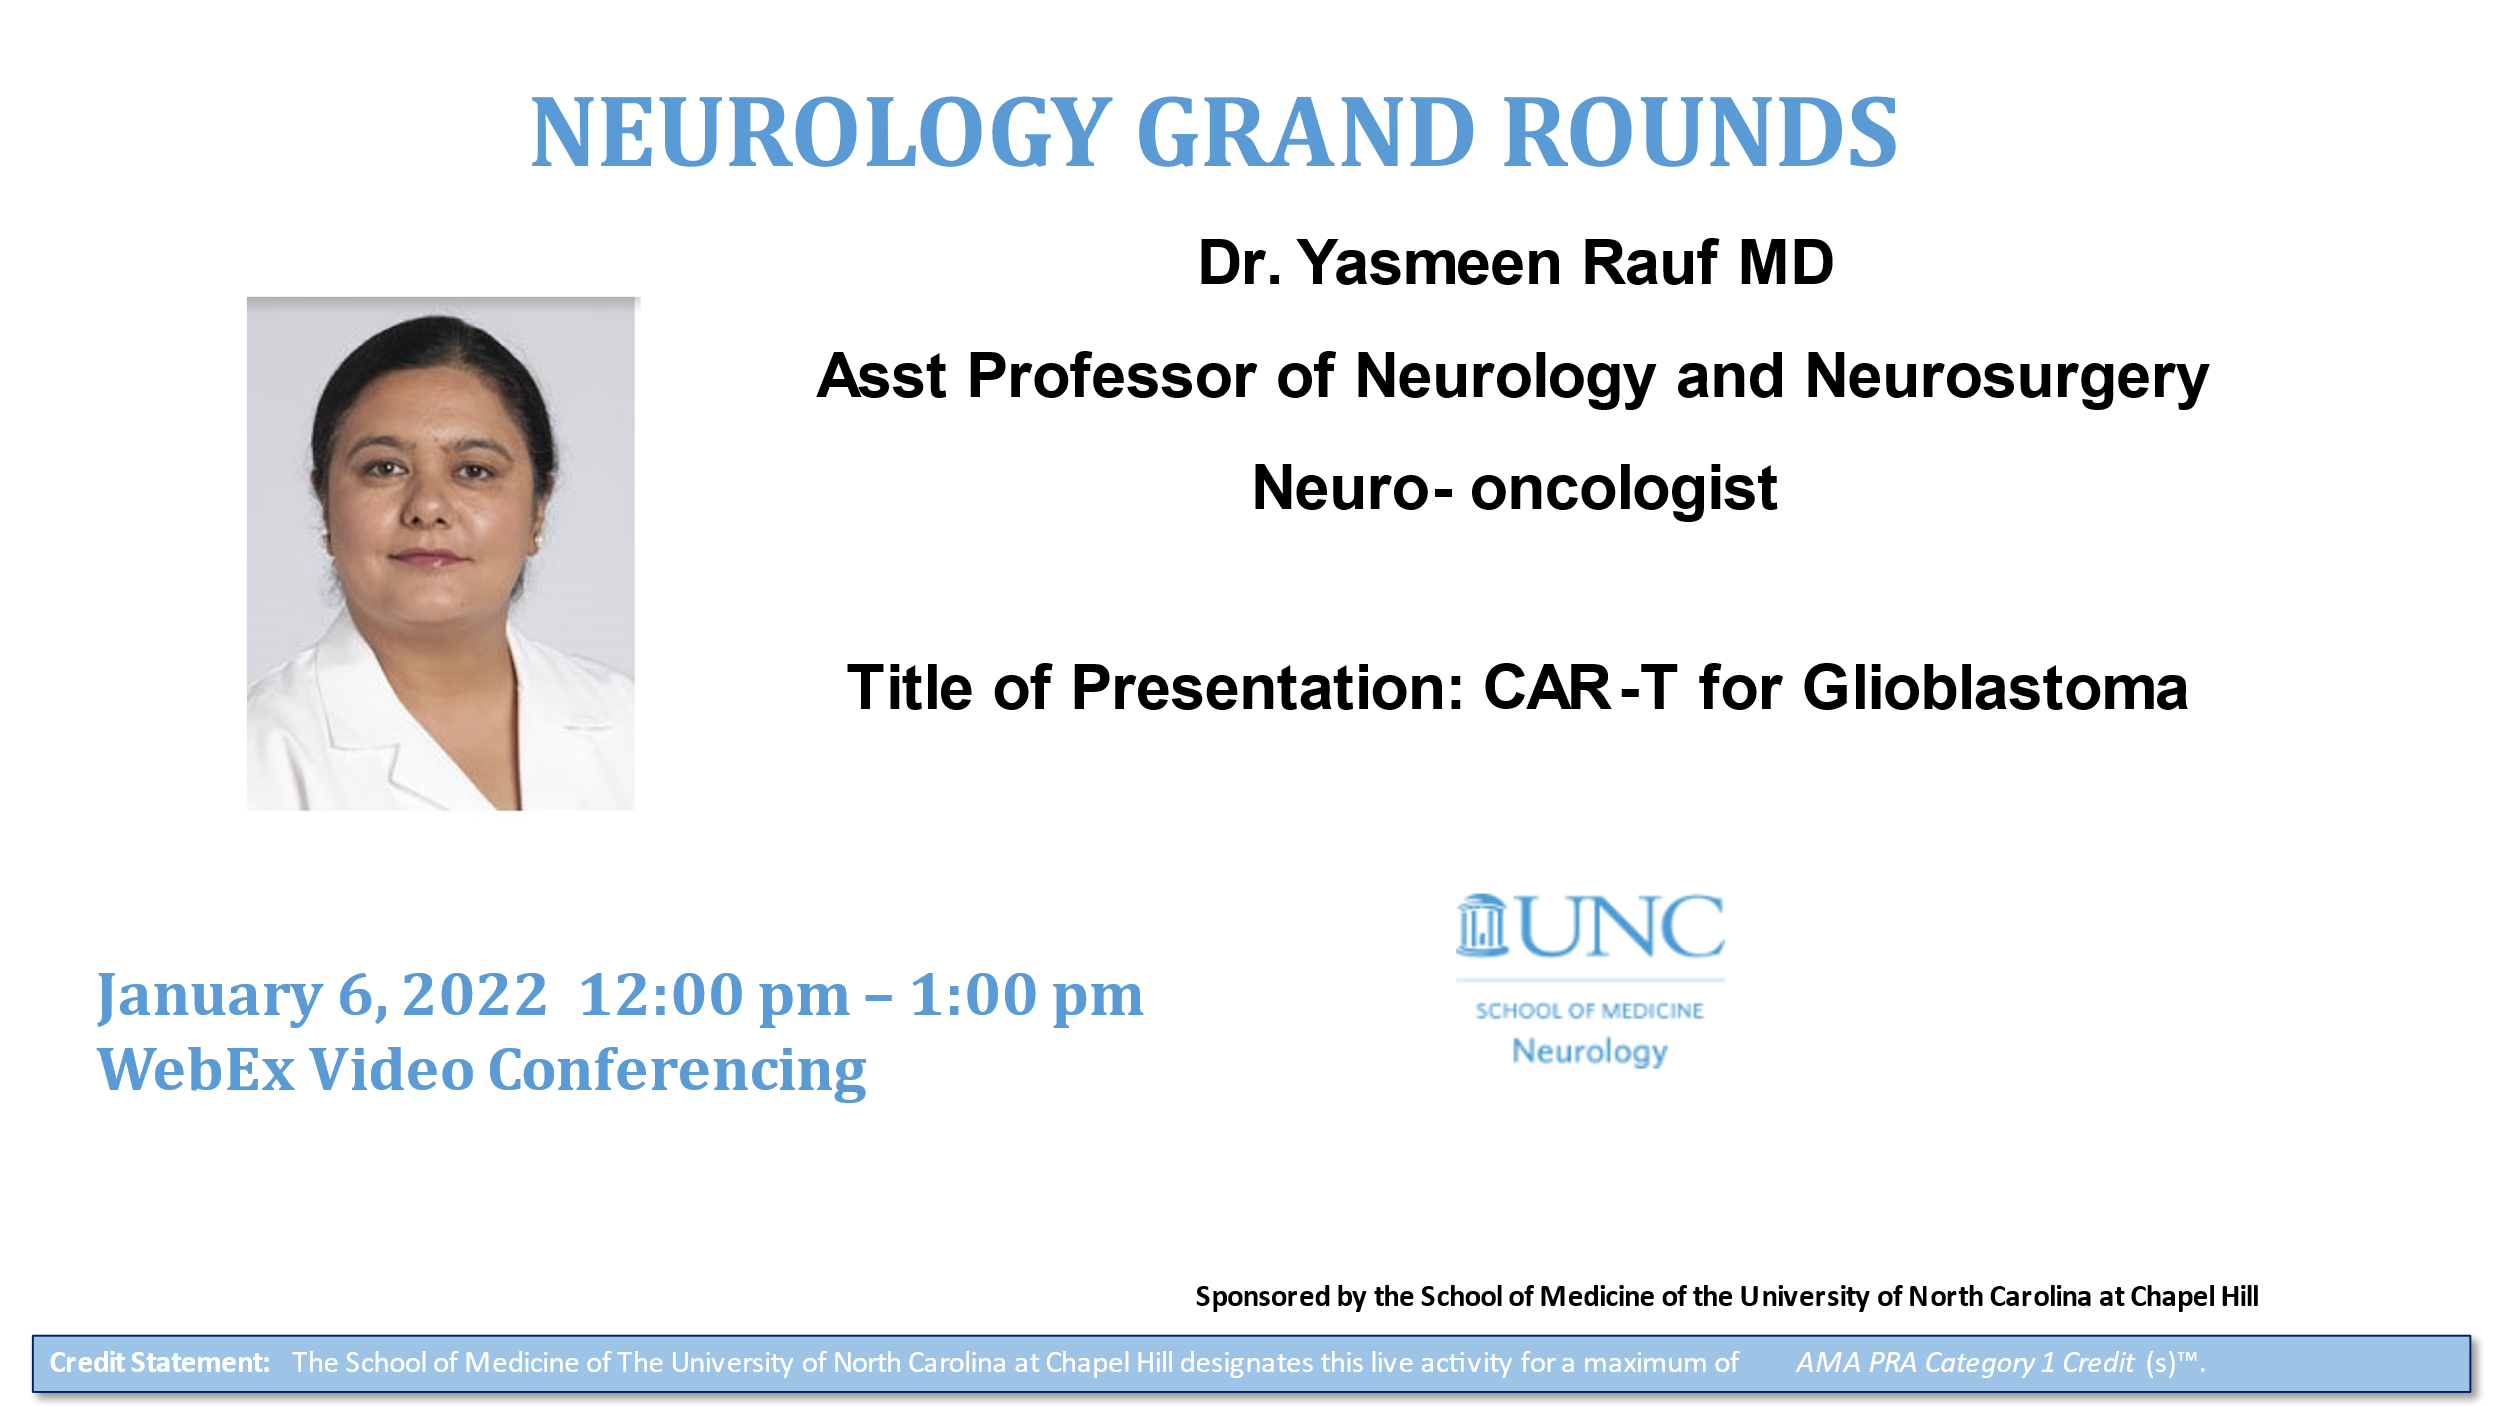 Dr. Yasmeen Rauf - Grand Rounds